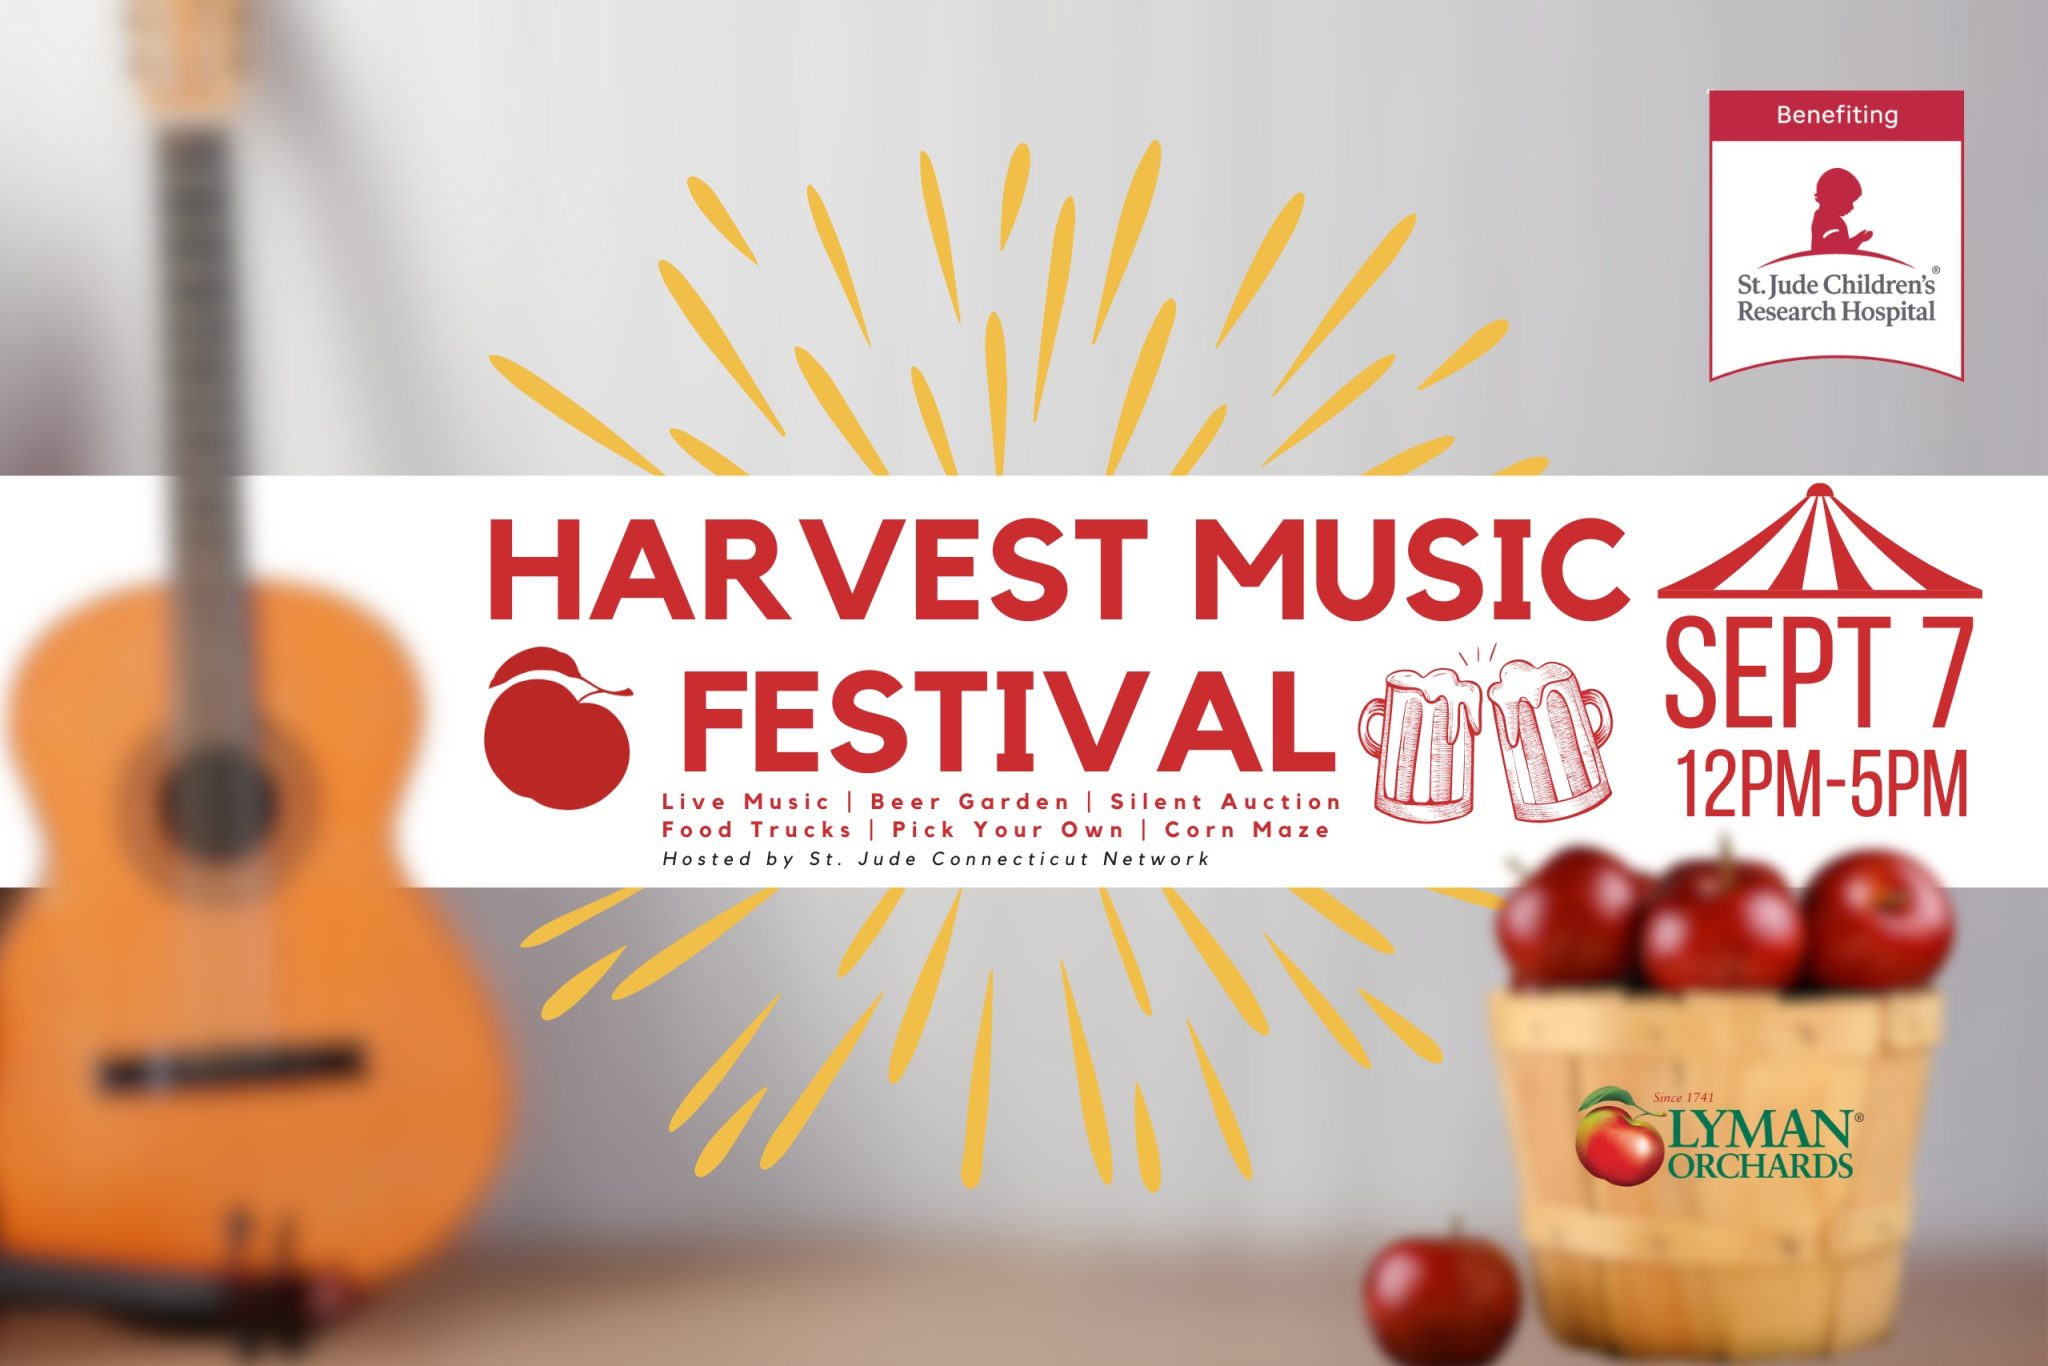 The Harvest Music Festival at Lyman Orchards